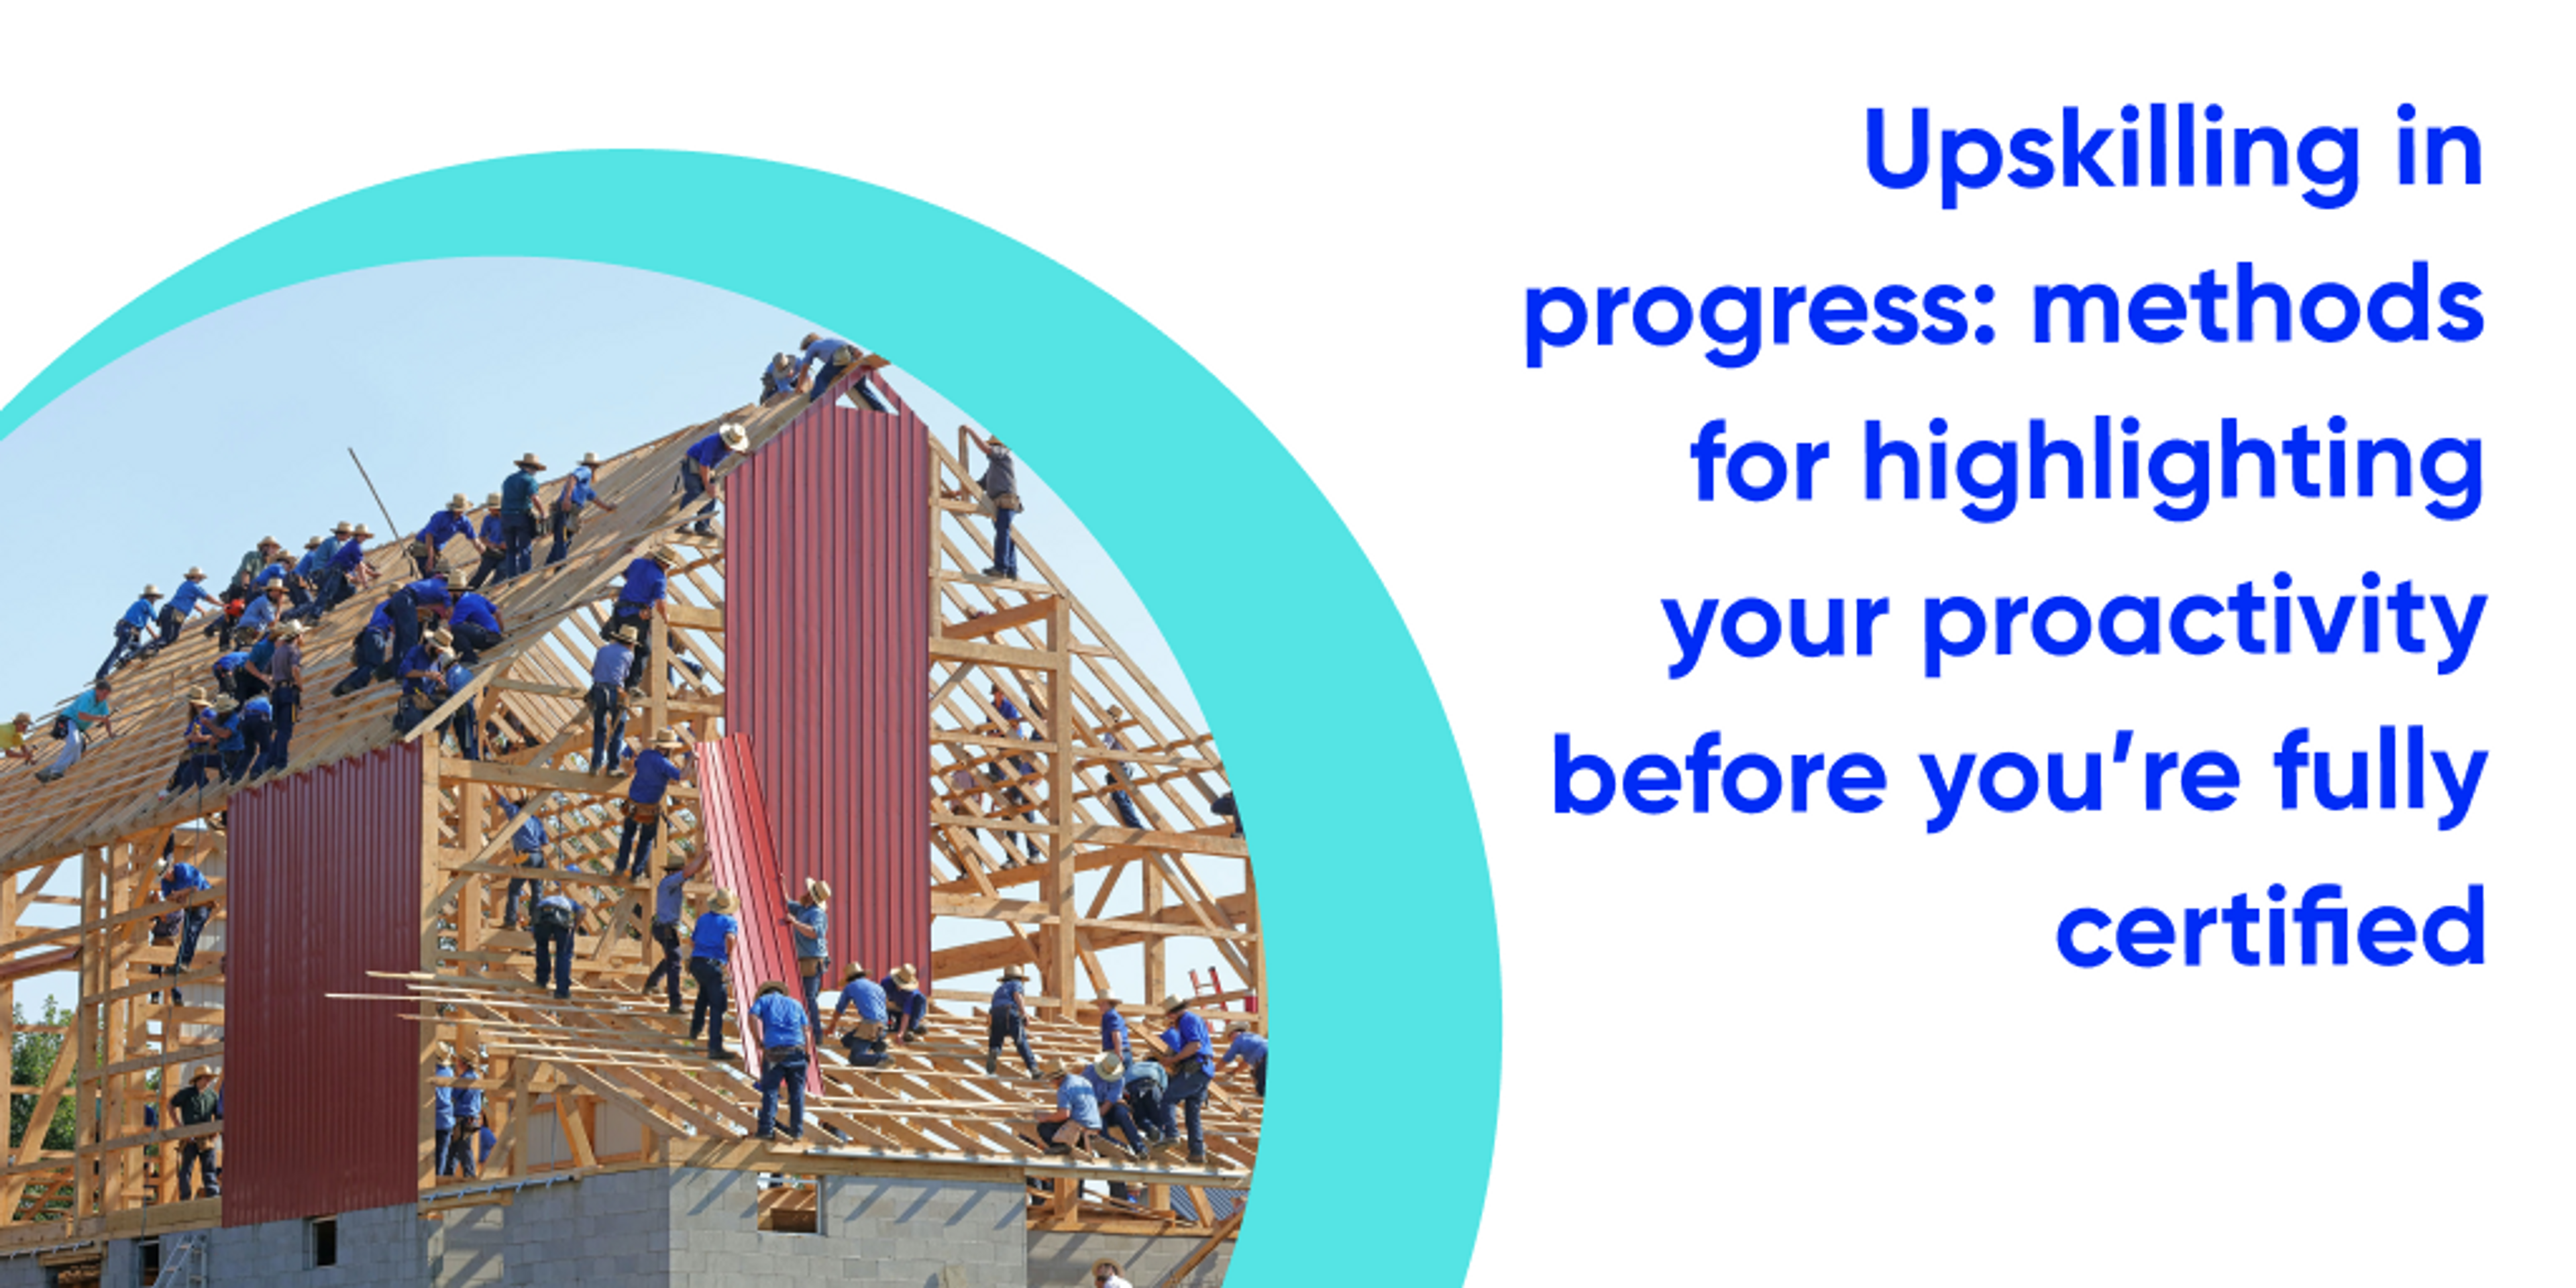 Image of a group of people building a barn with text in blue that says "Upskilling In Progress: Methods for Highlighting your Proactivity Before You’re Fully Certified"